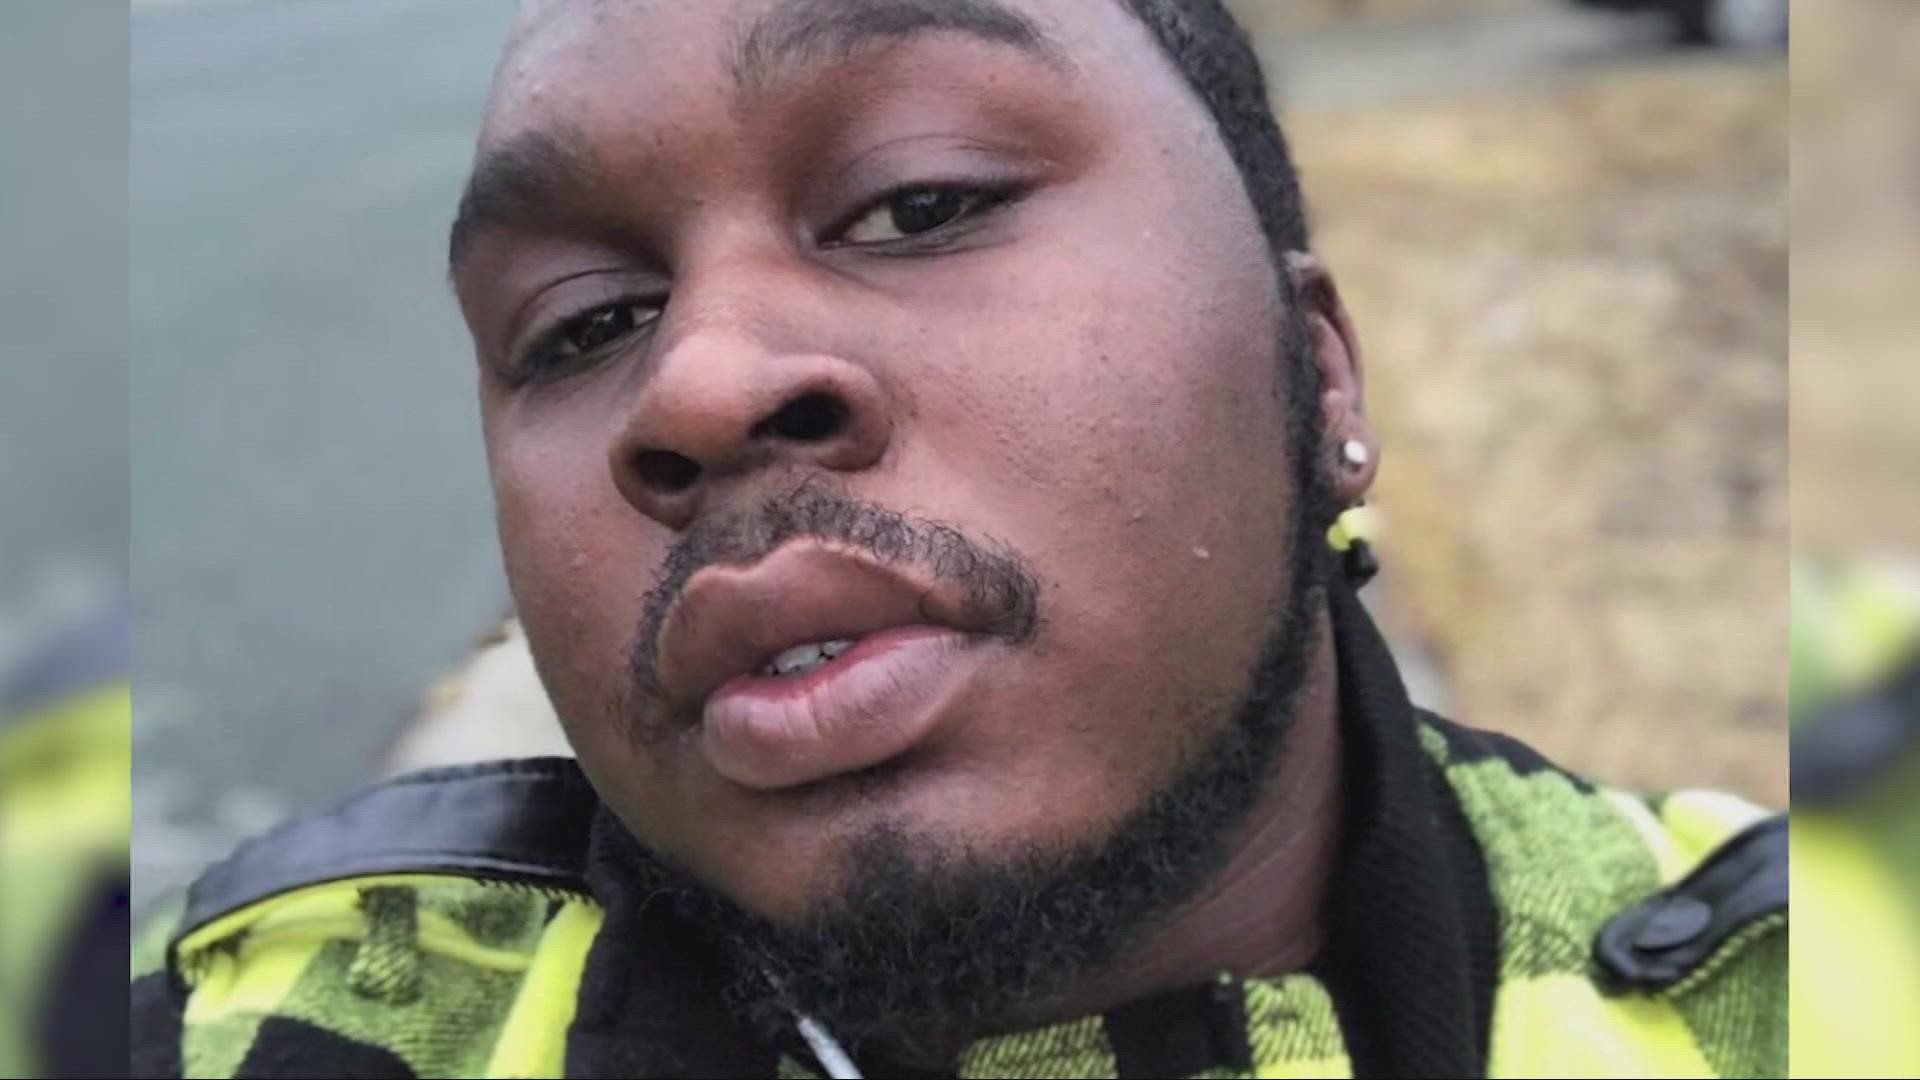 One week after 23-year-old Tyrique Harris was shot and killed at a Golden 1 Credit Union near Sherwood Mall in Stockton, his family seeks answers.